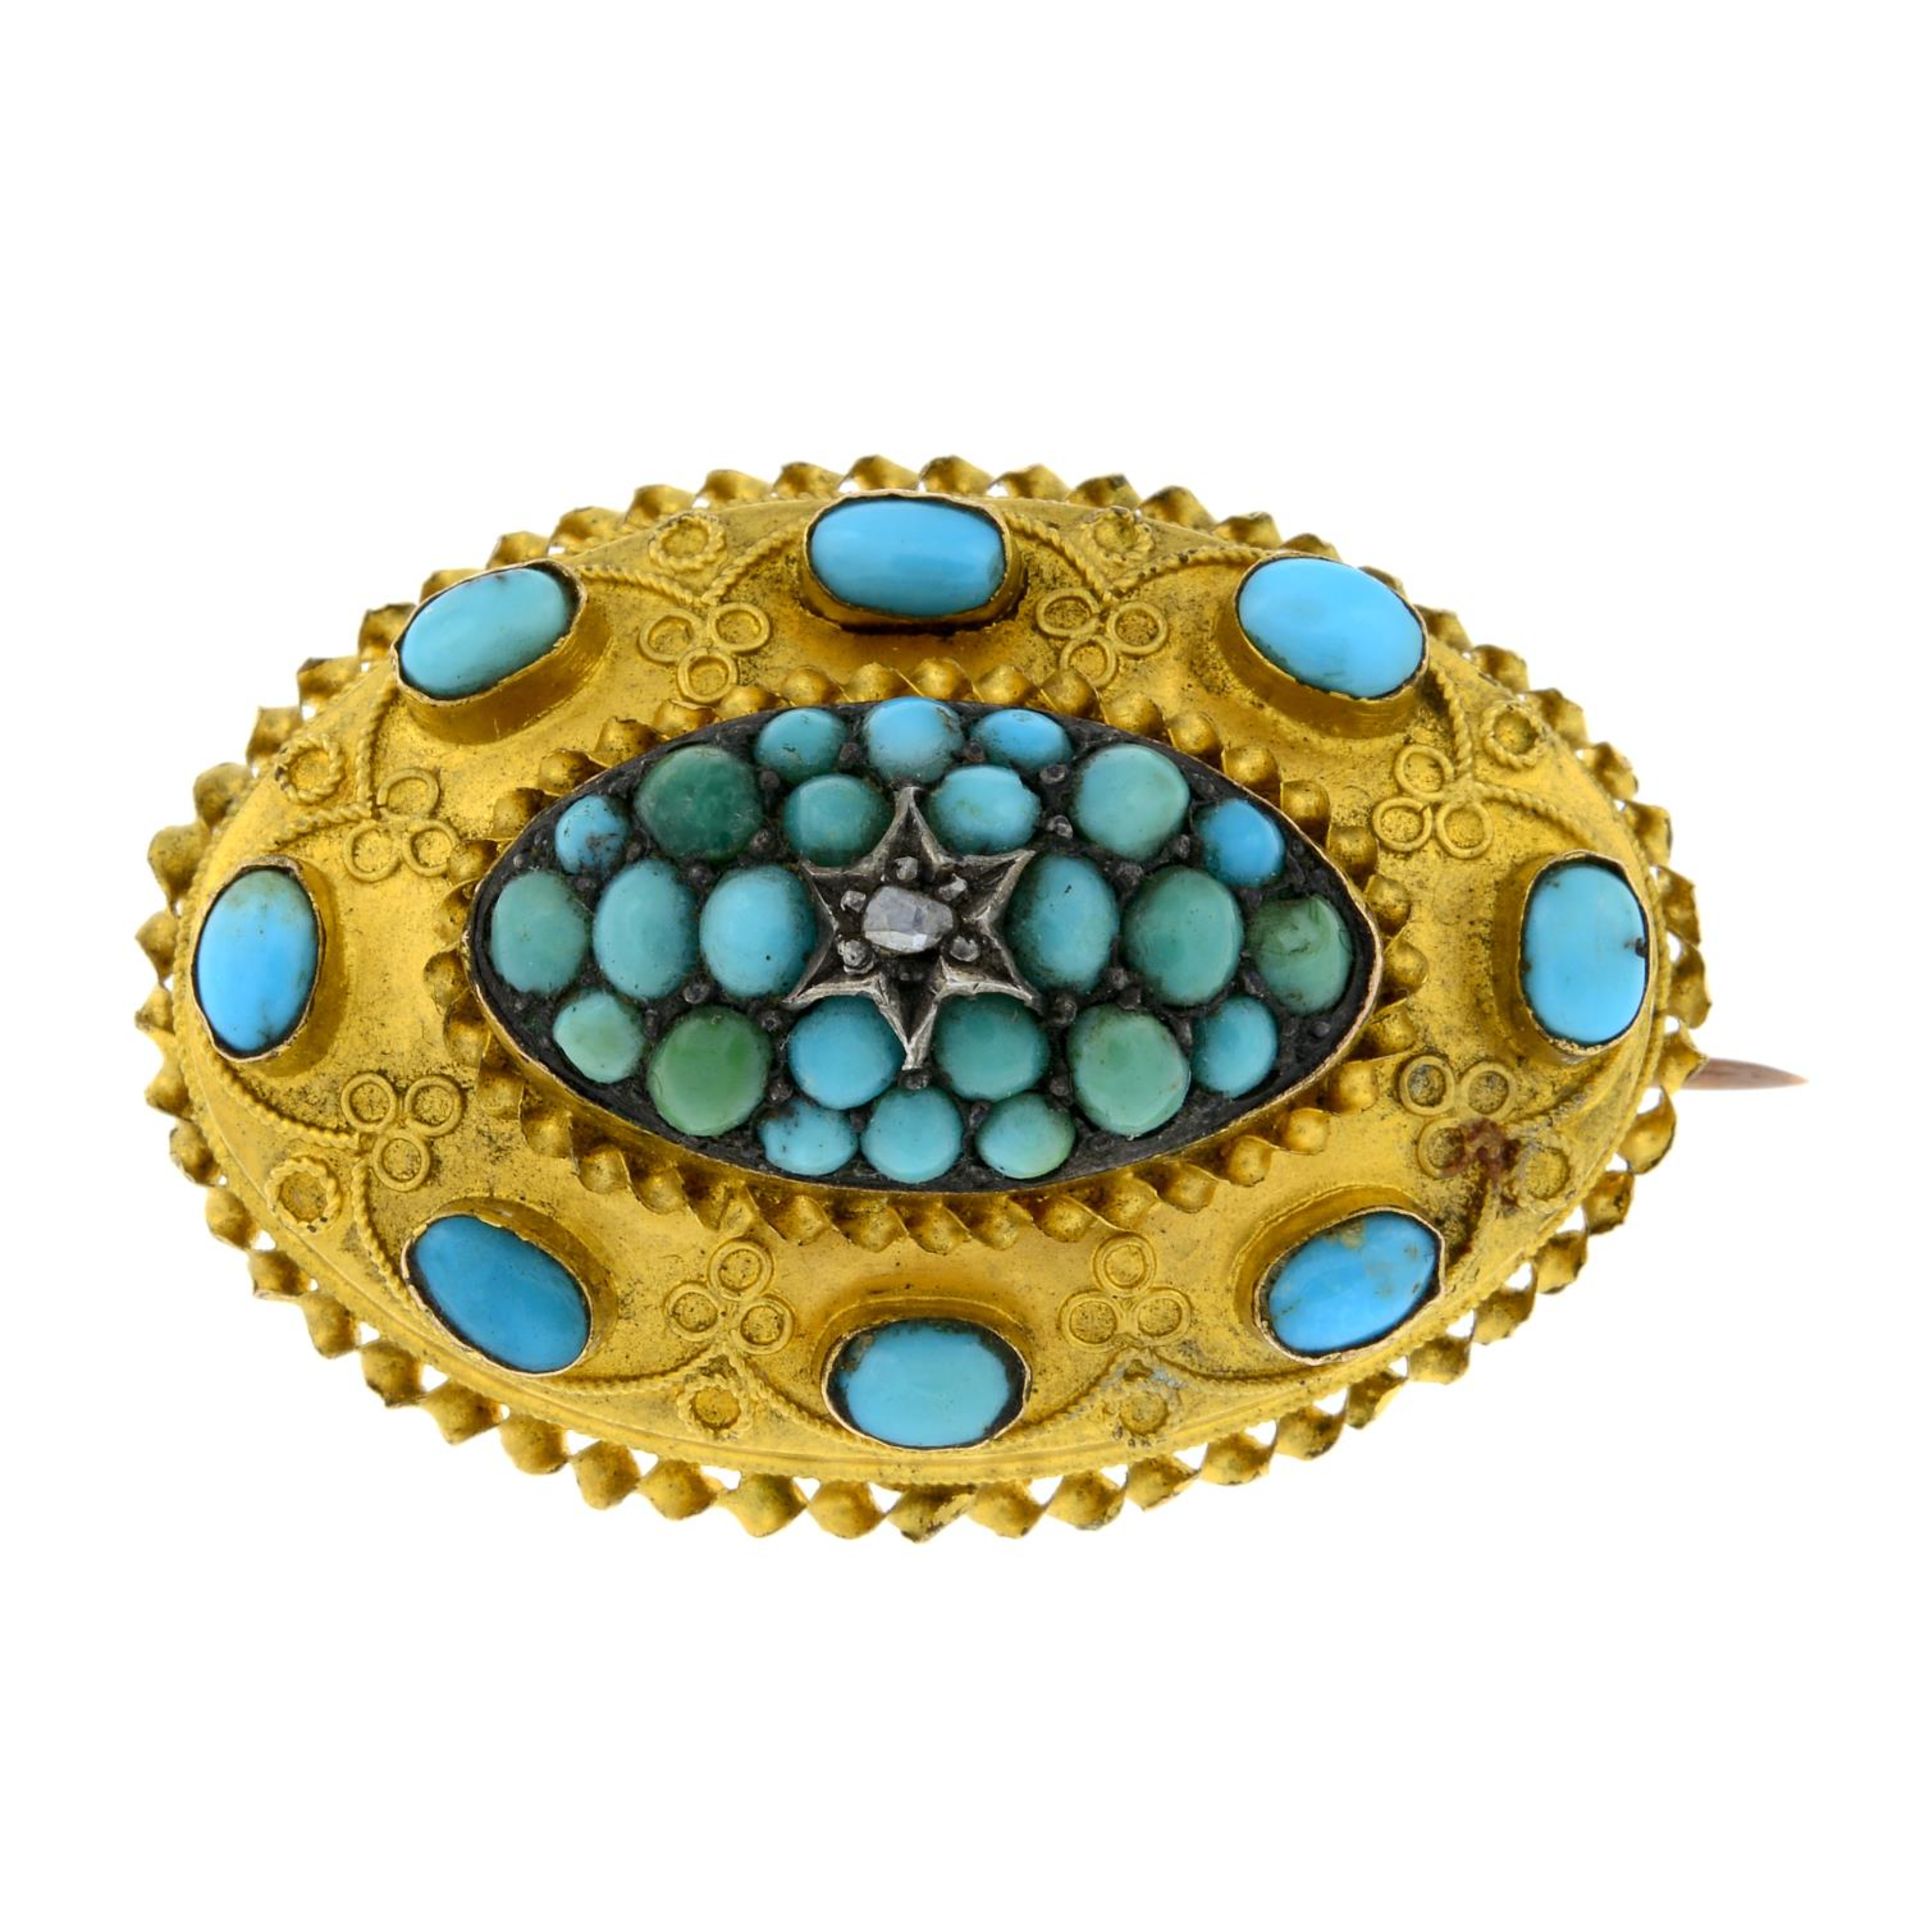 A late 19th century 15ct gold turquoise and diamond brooch, with cannetille detail.Stamped 15CT.